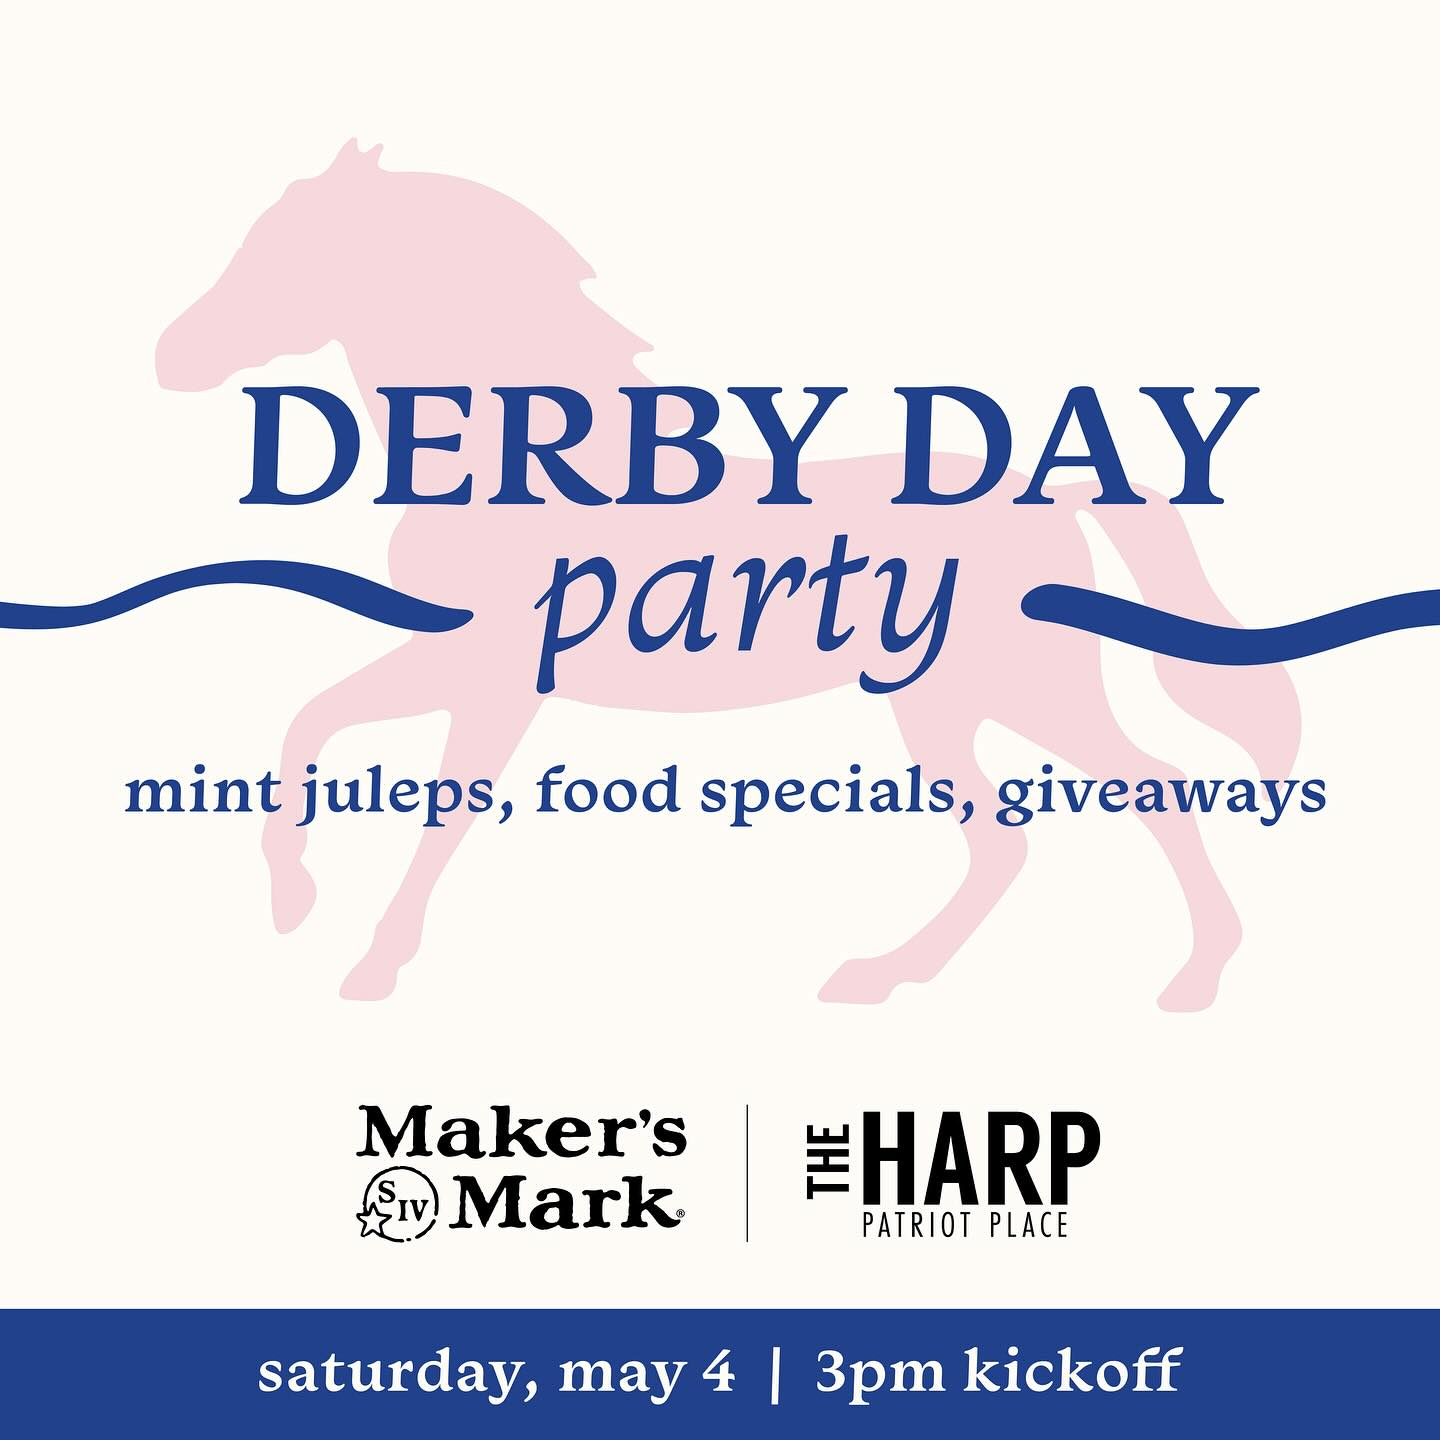 The Harp Derby Day Party